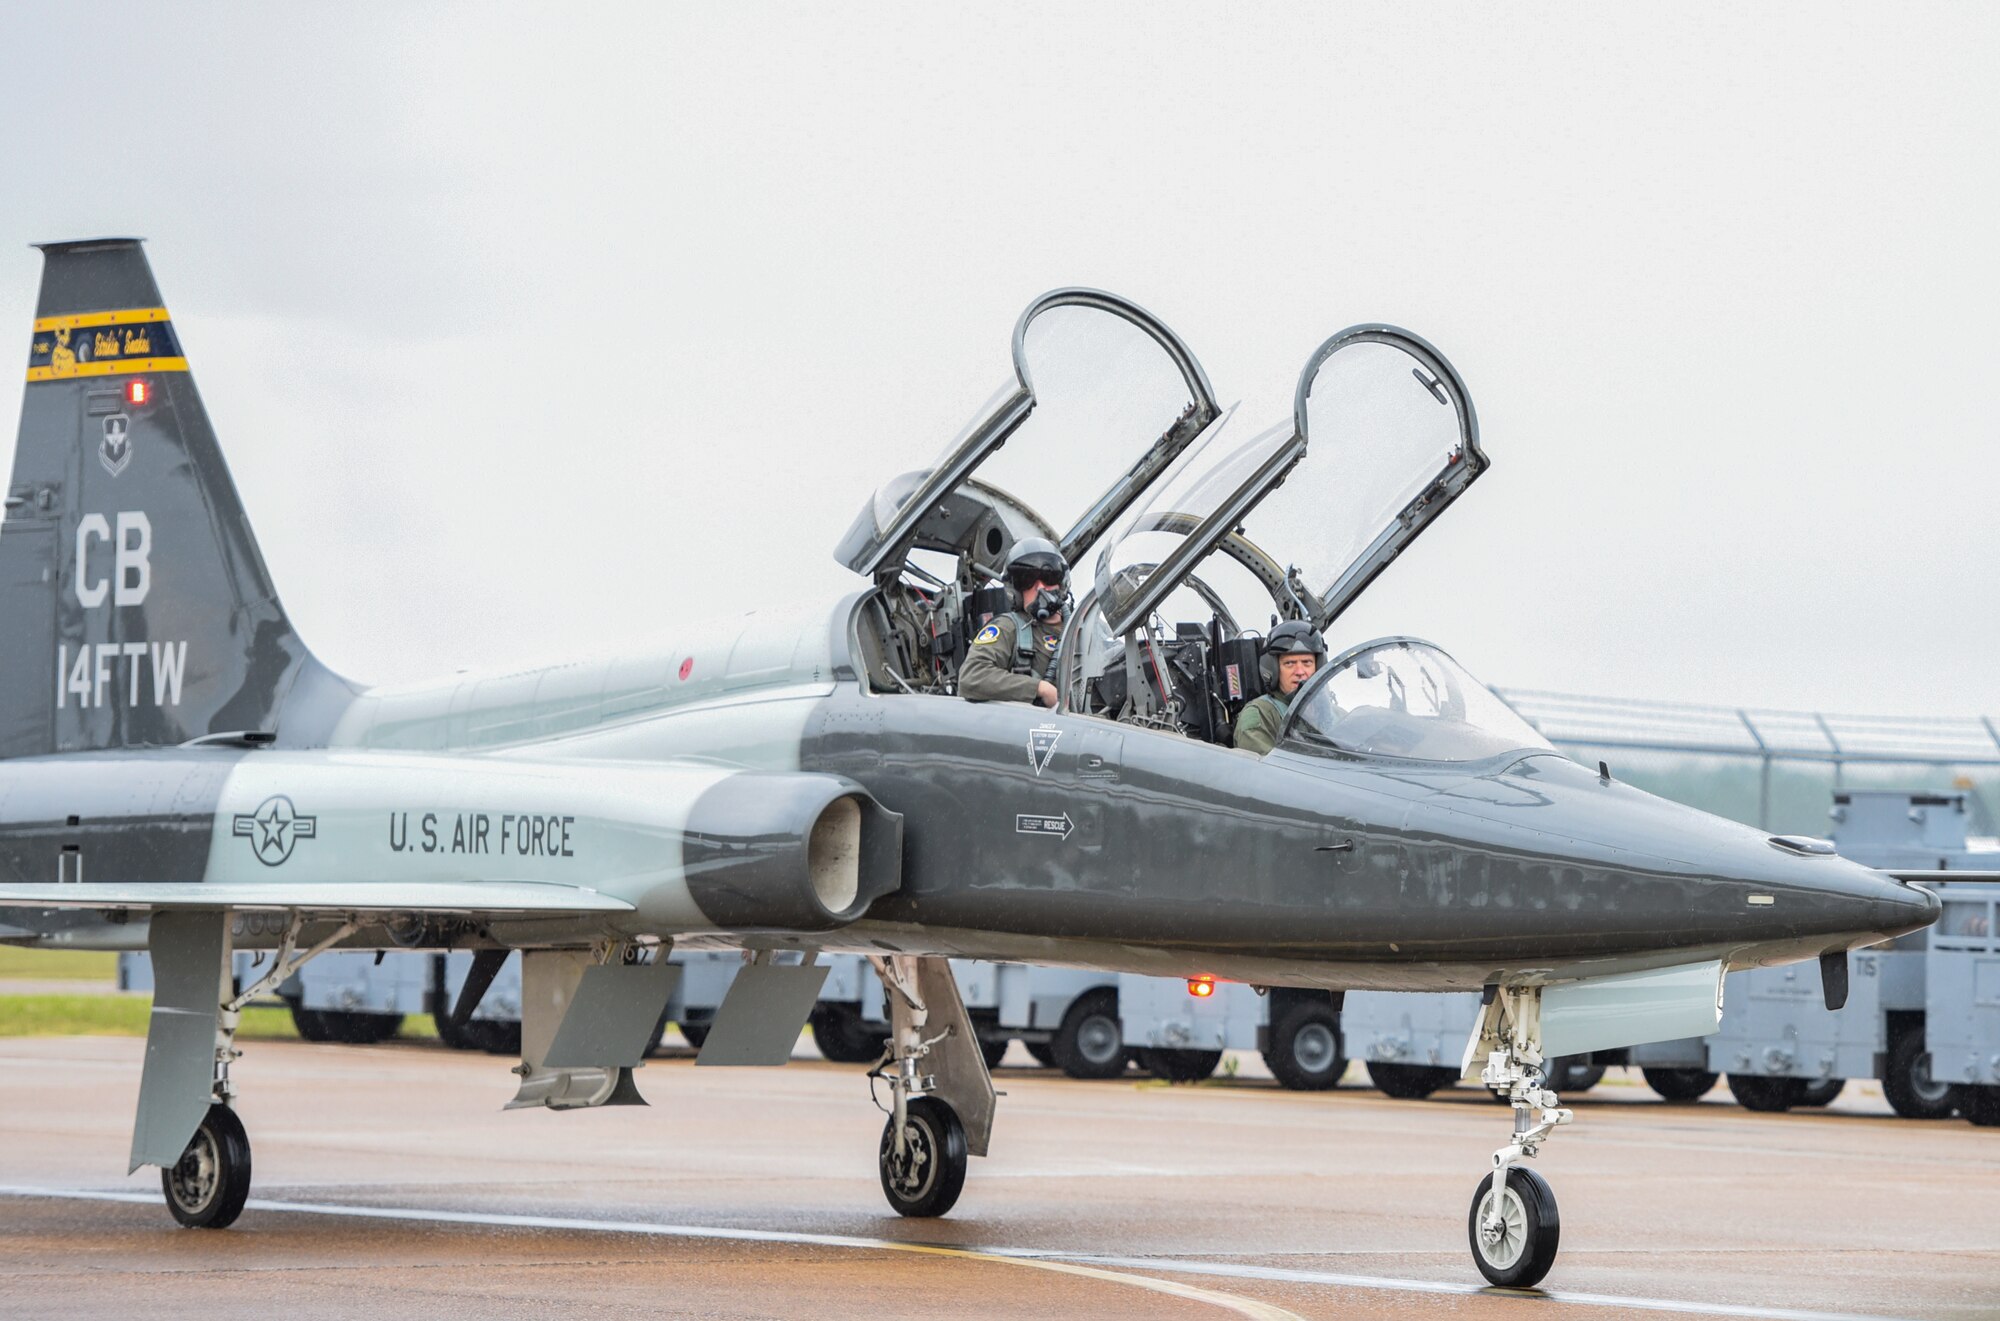 U.S. Air Force Lt. Col. David Easterling Jr., 43rd Flying Training Squadron instructor pilot, and Capt. Kevin Mudd, 50th FTS instructor pilot, taxi on the flightline after his flight on September 23, 2020, at Columbus Air Force Base, Miss. The T-38 first flew in 1959 and the Air and Education Command began receiving T-38 models in 2001. (U.S. Air Force photo by Airman 1st Class Davis Donaldson)